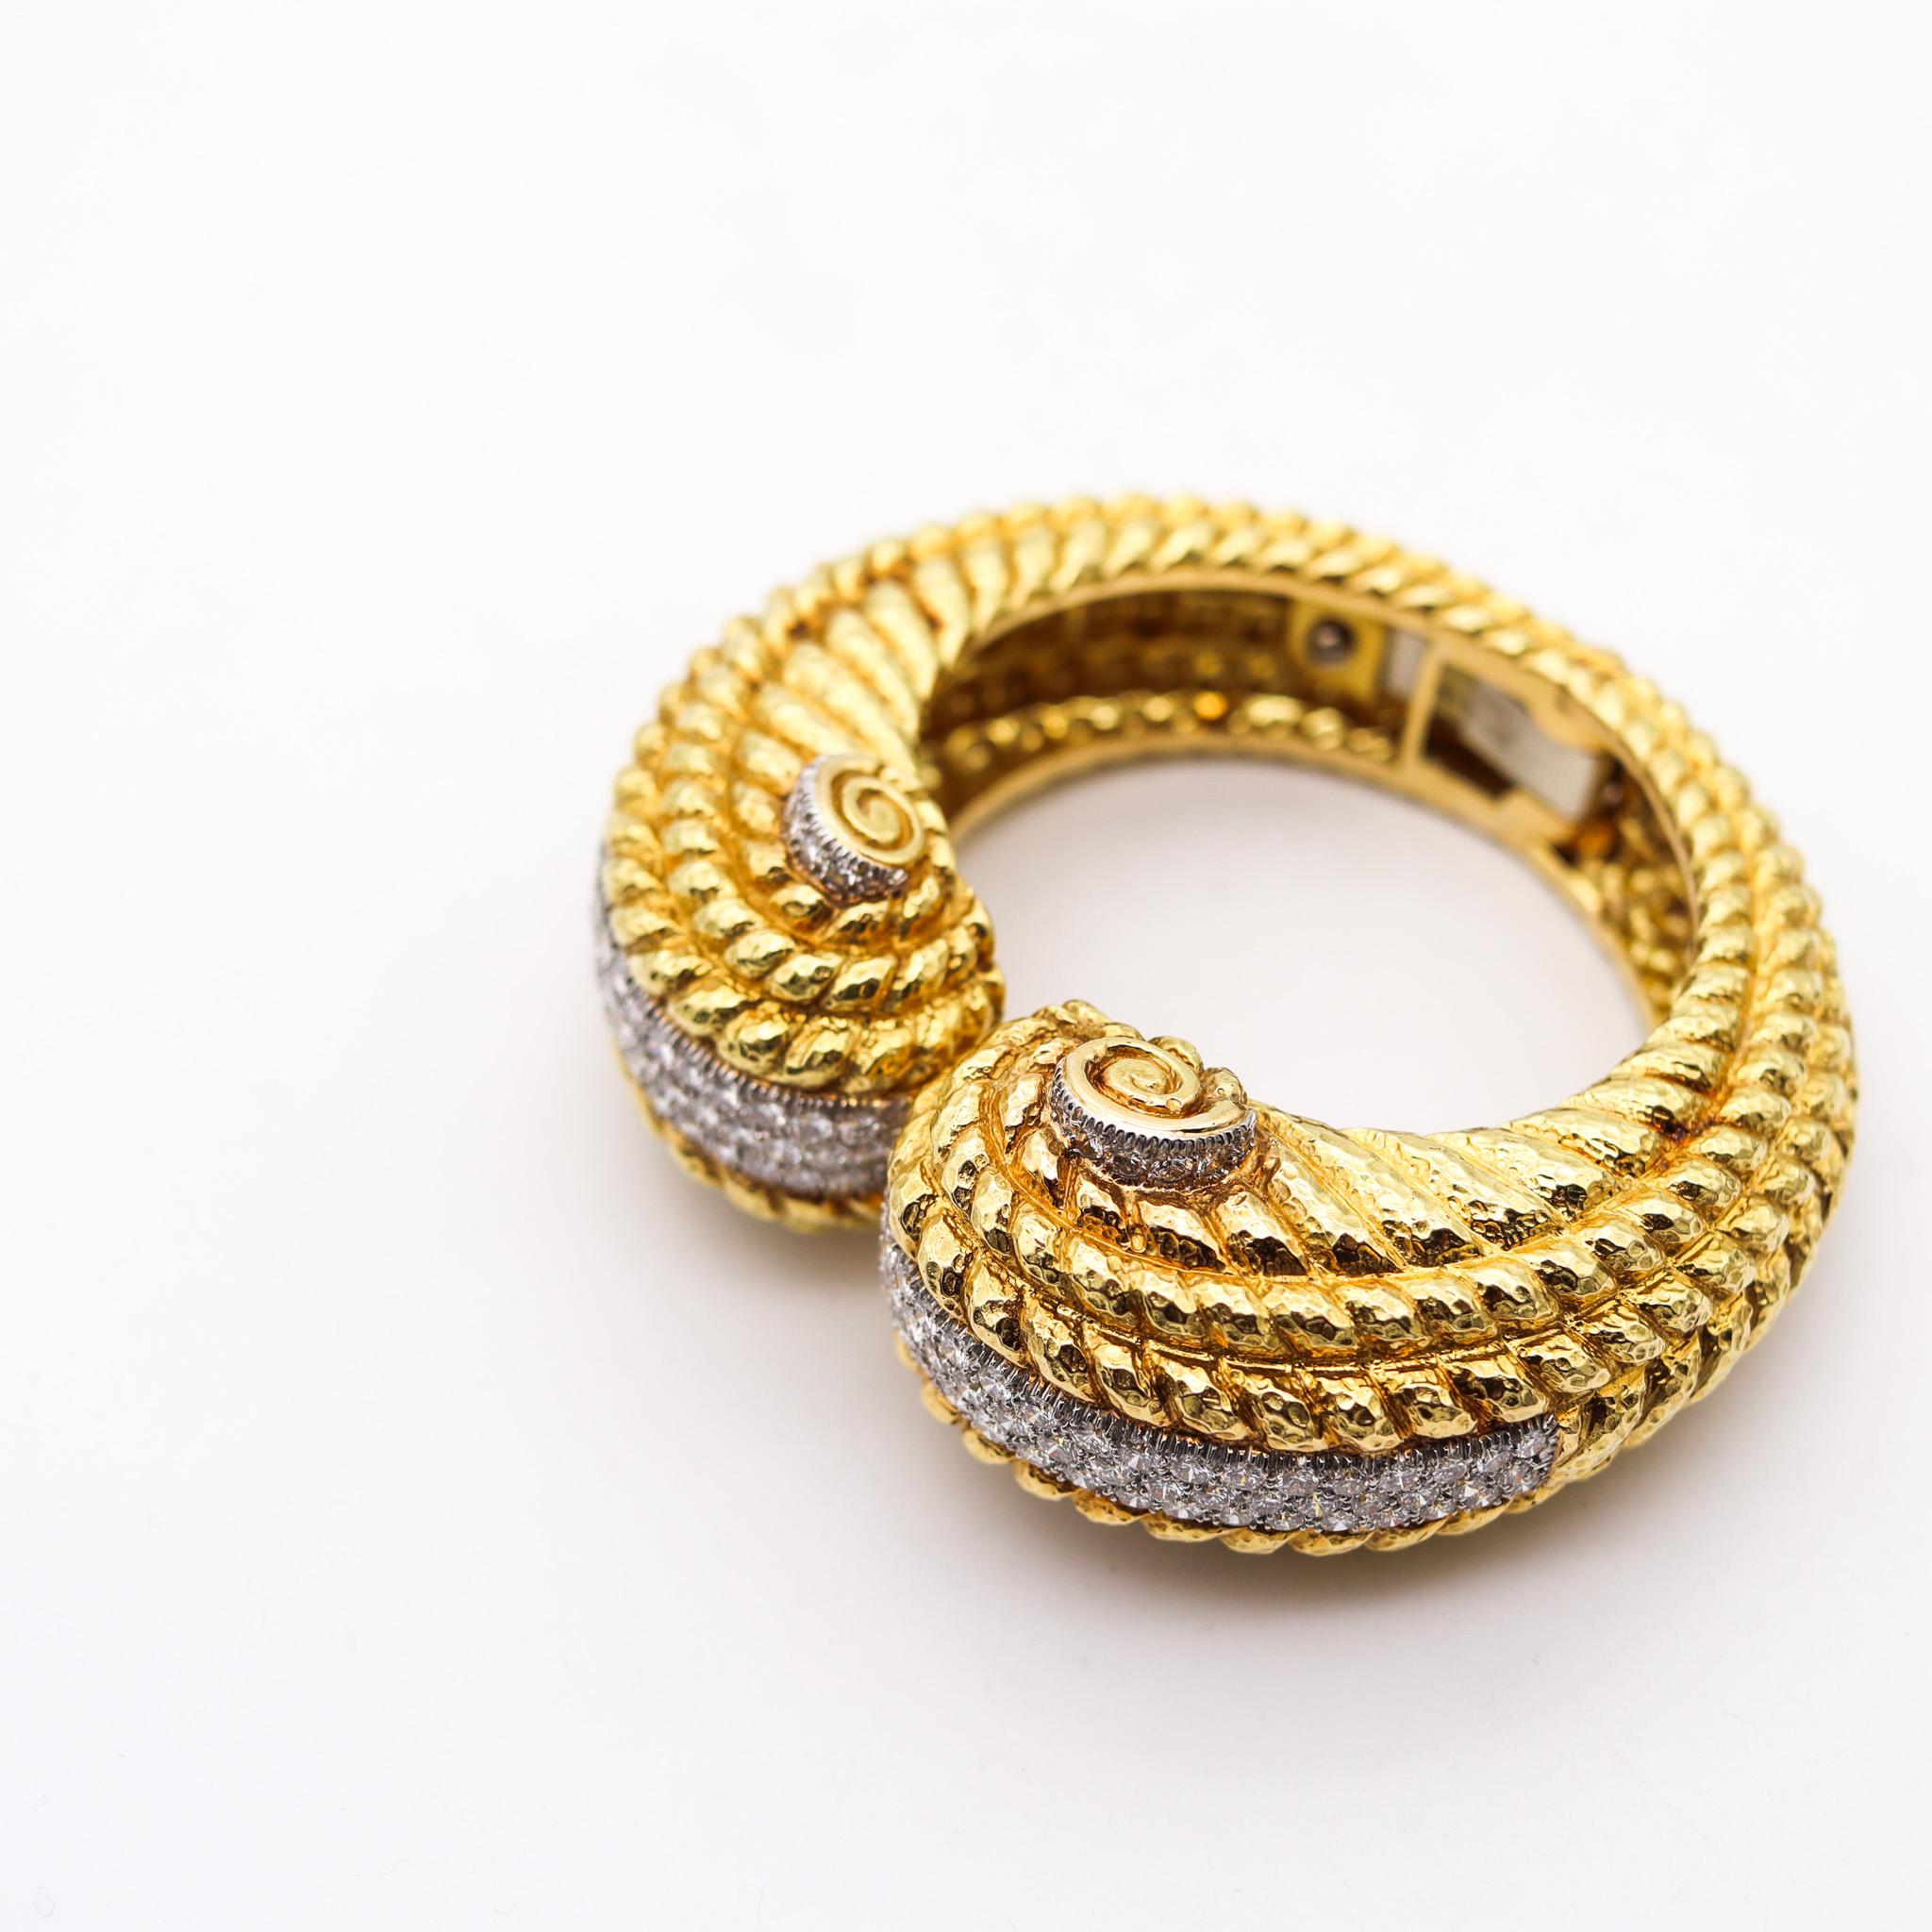 David Webb 1960 Bangle Bracelet in 18kt Yellow Gold with 9.52 Ctw in Diamonds In Excellent Condition For Sale In Miami, FL